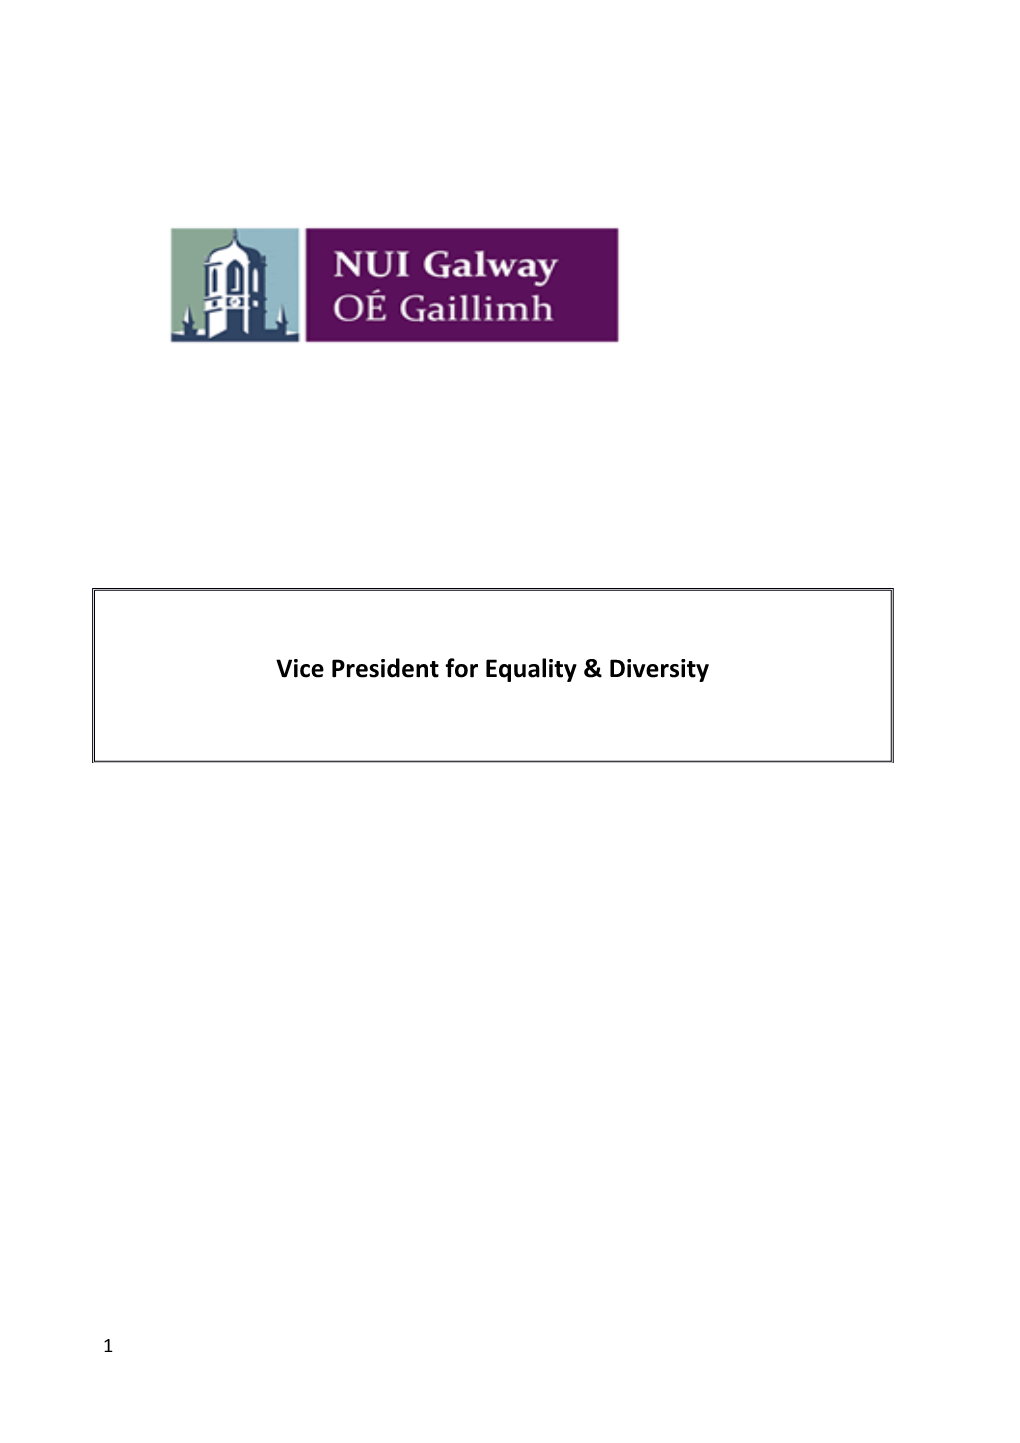 Vice President for Equality & Diversity